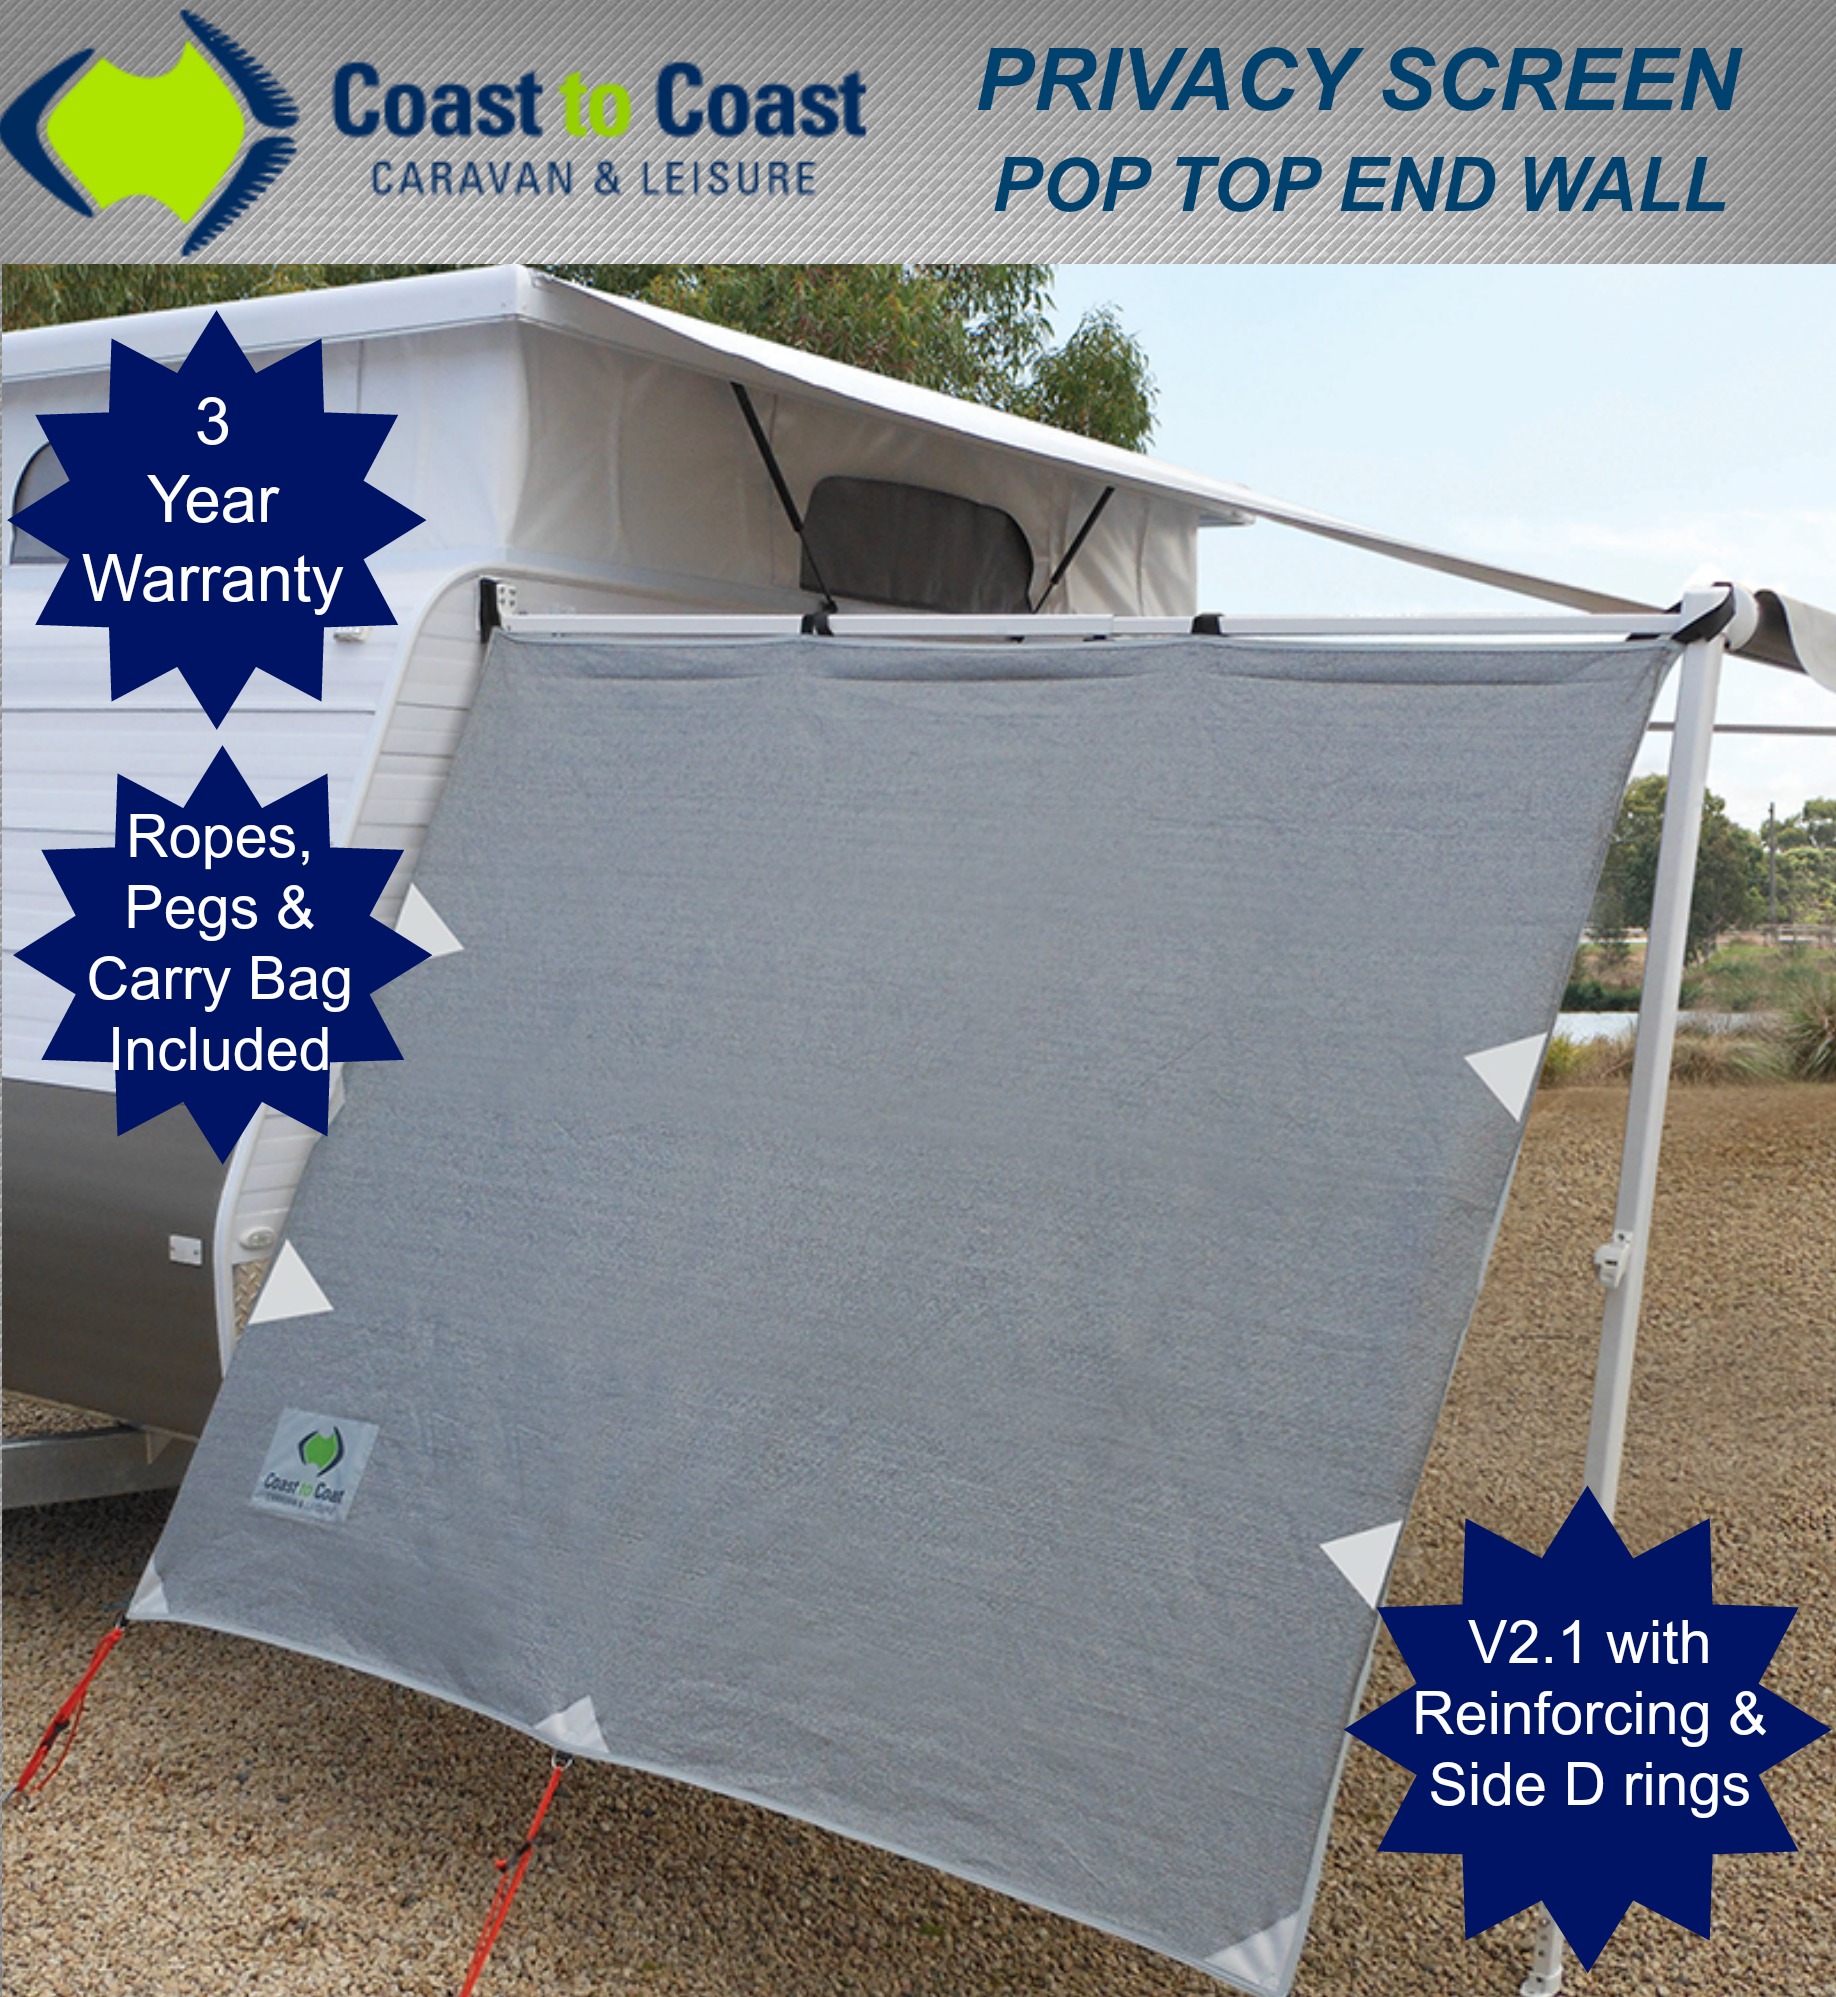 Coast Side Sun Privacy Screen End Wall For Pop Top Rollout Awning